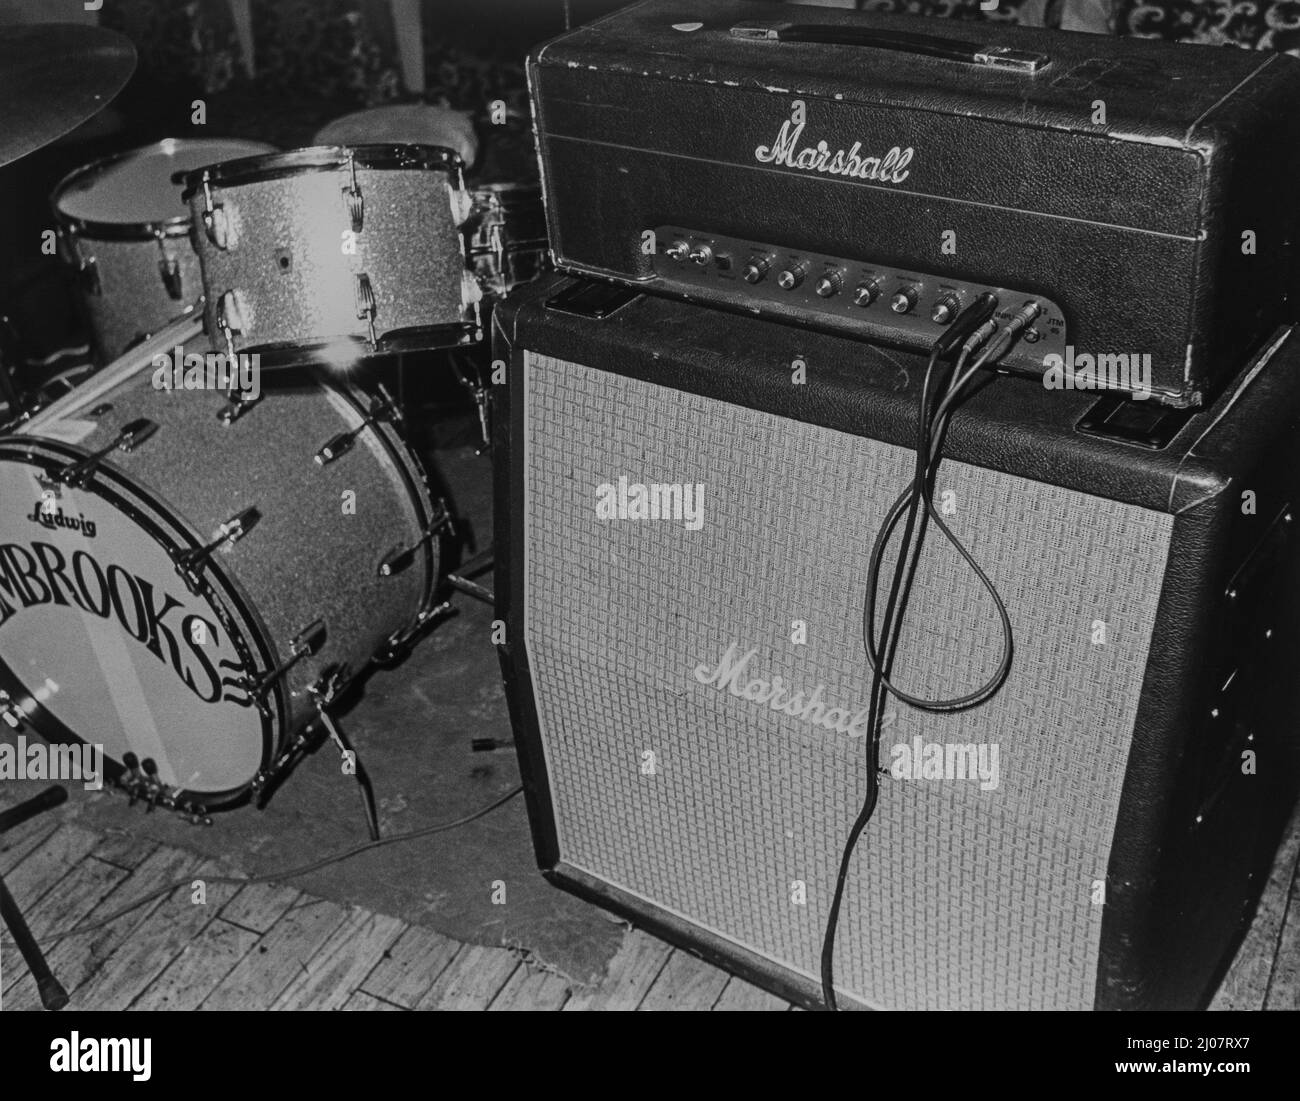 Marshall vintage amplifier with drums Stock Photo